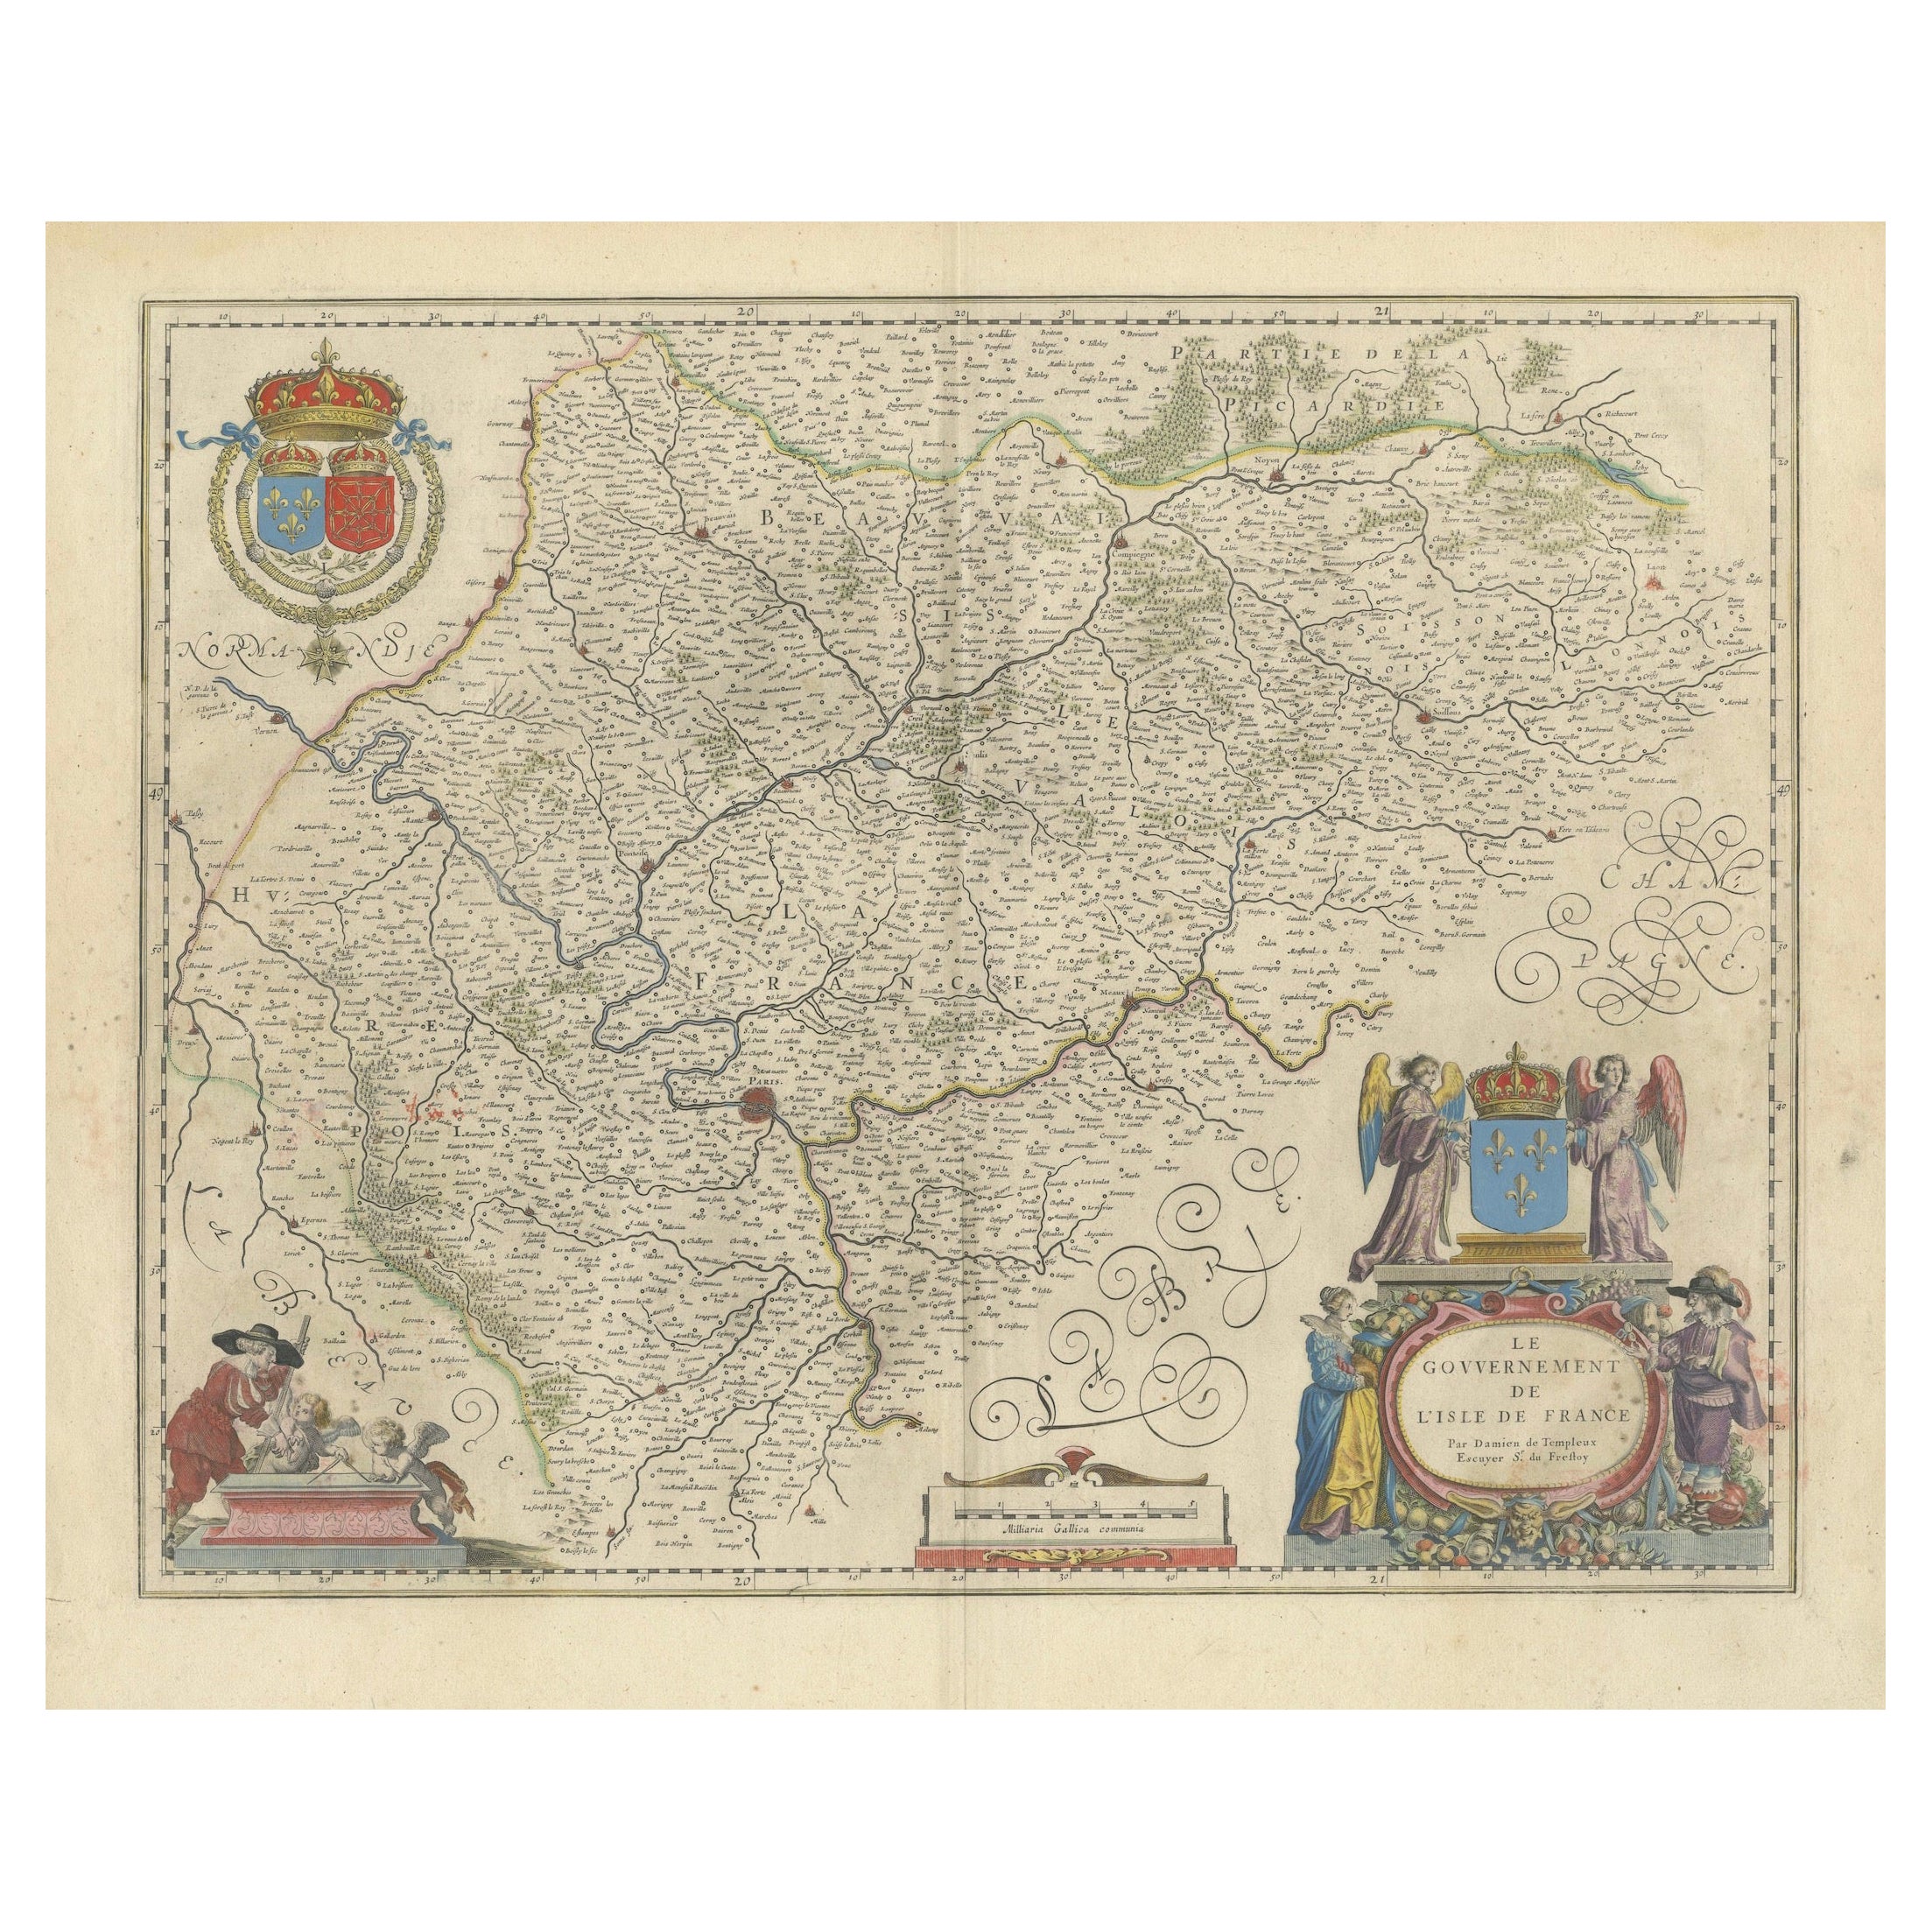 Mapping the Heart of France: Willem Blaeu's 17th Century Île-de-France, ca.1650